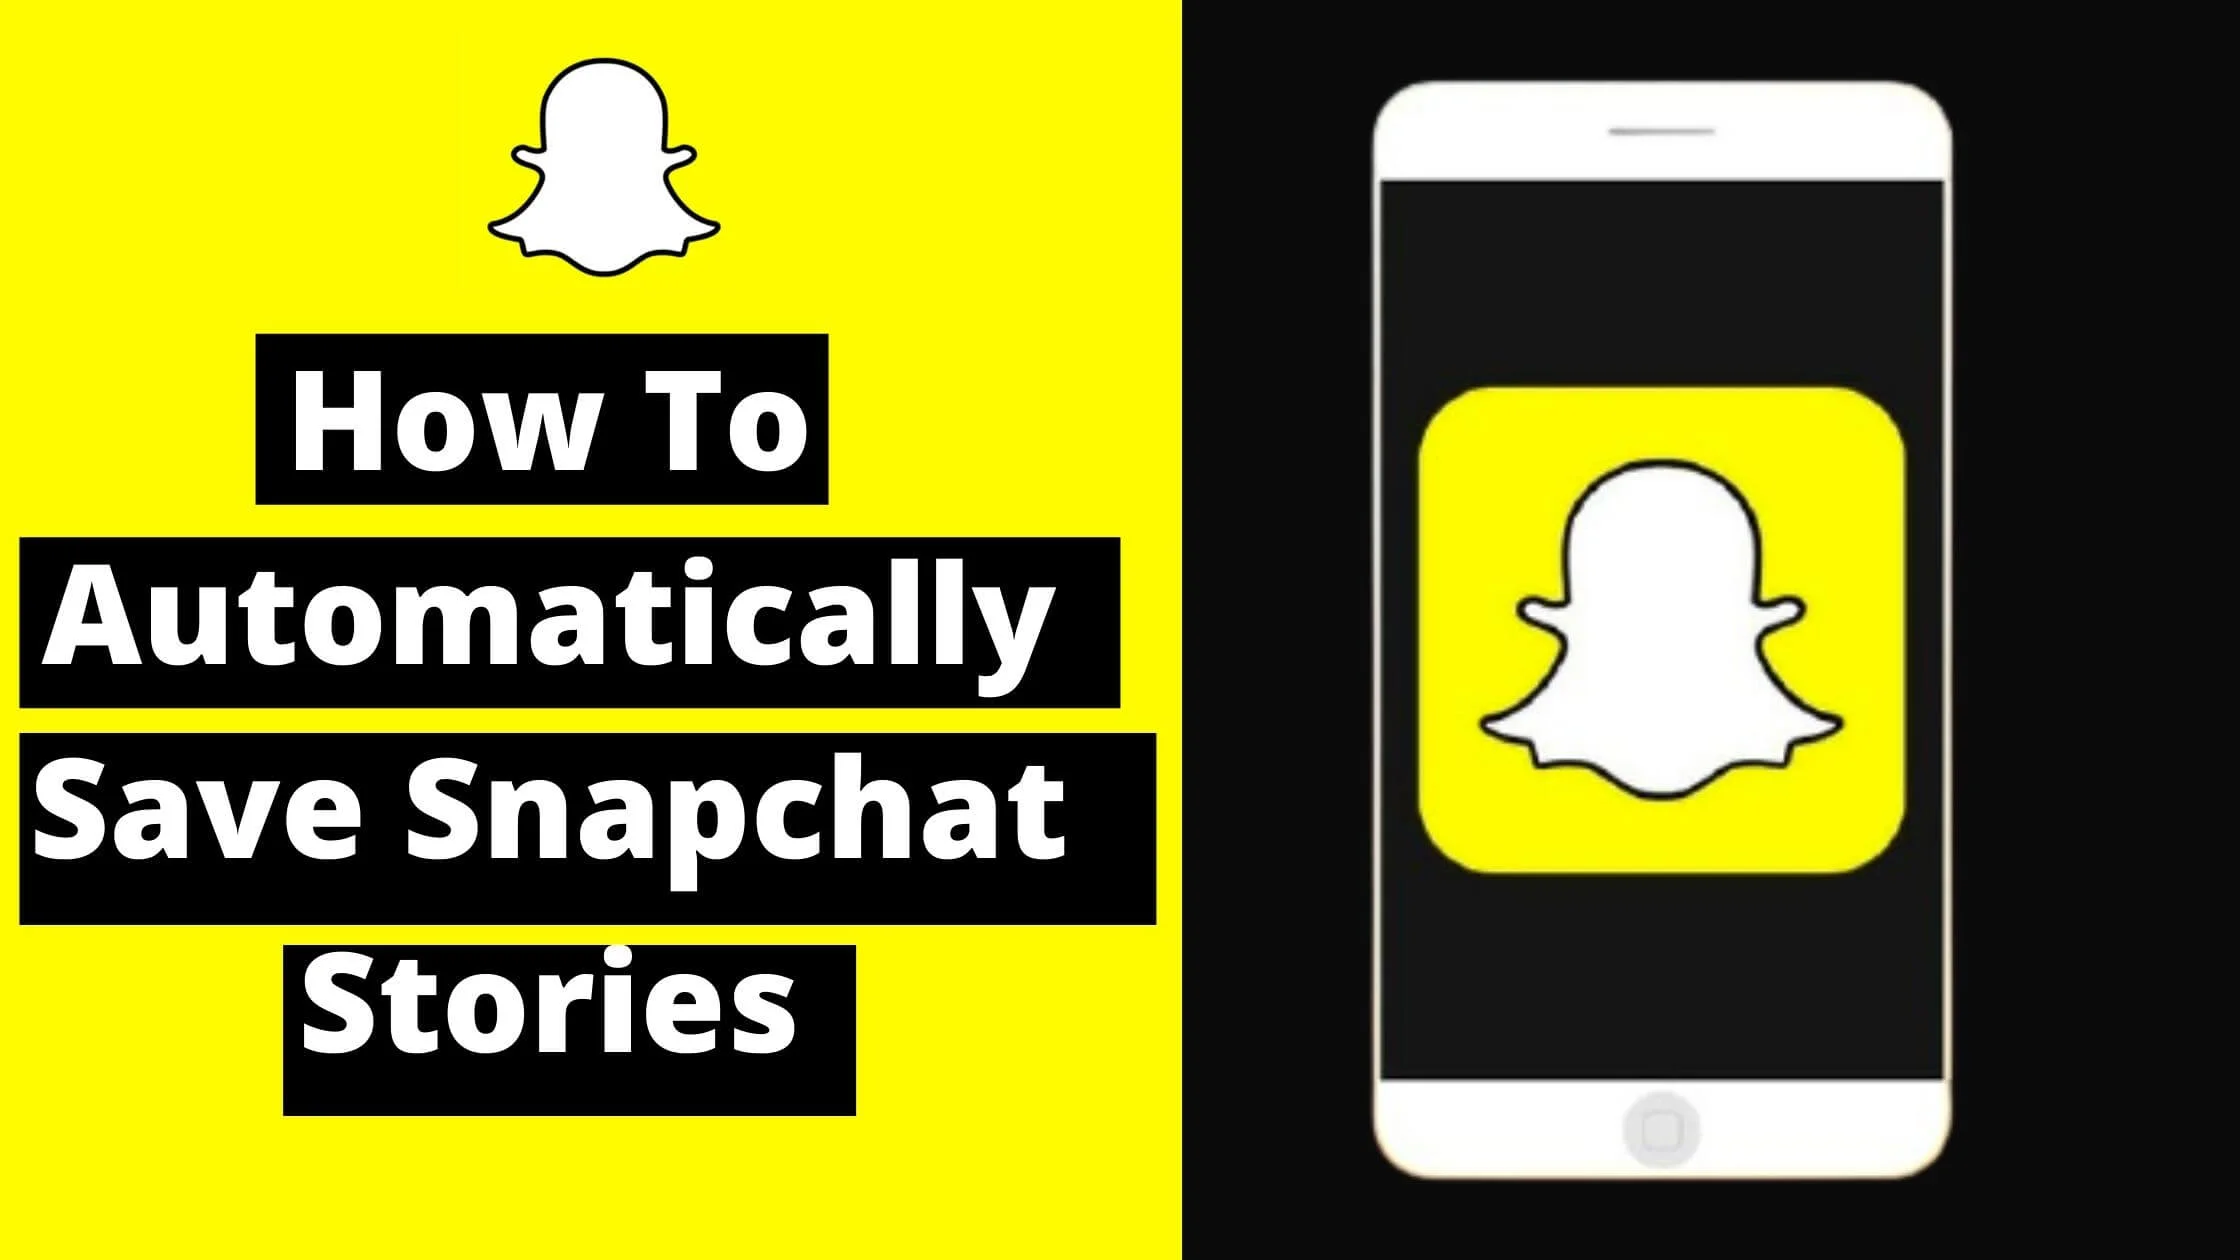 How To Automatically Save Snapchat Stories